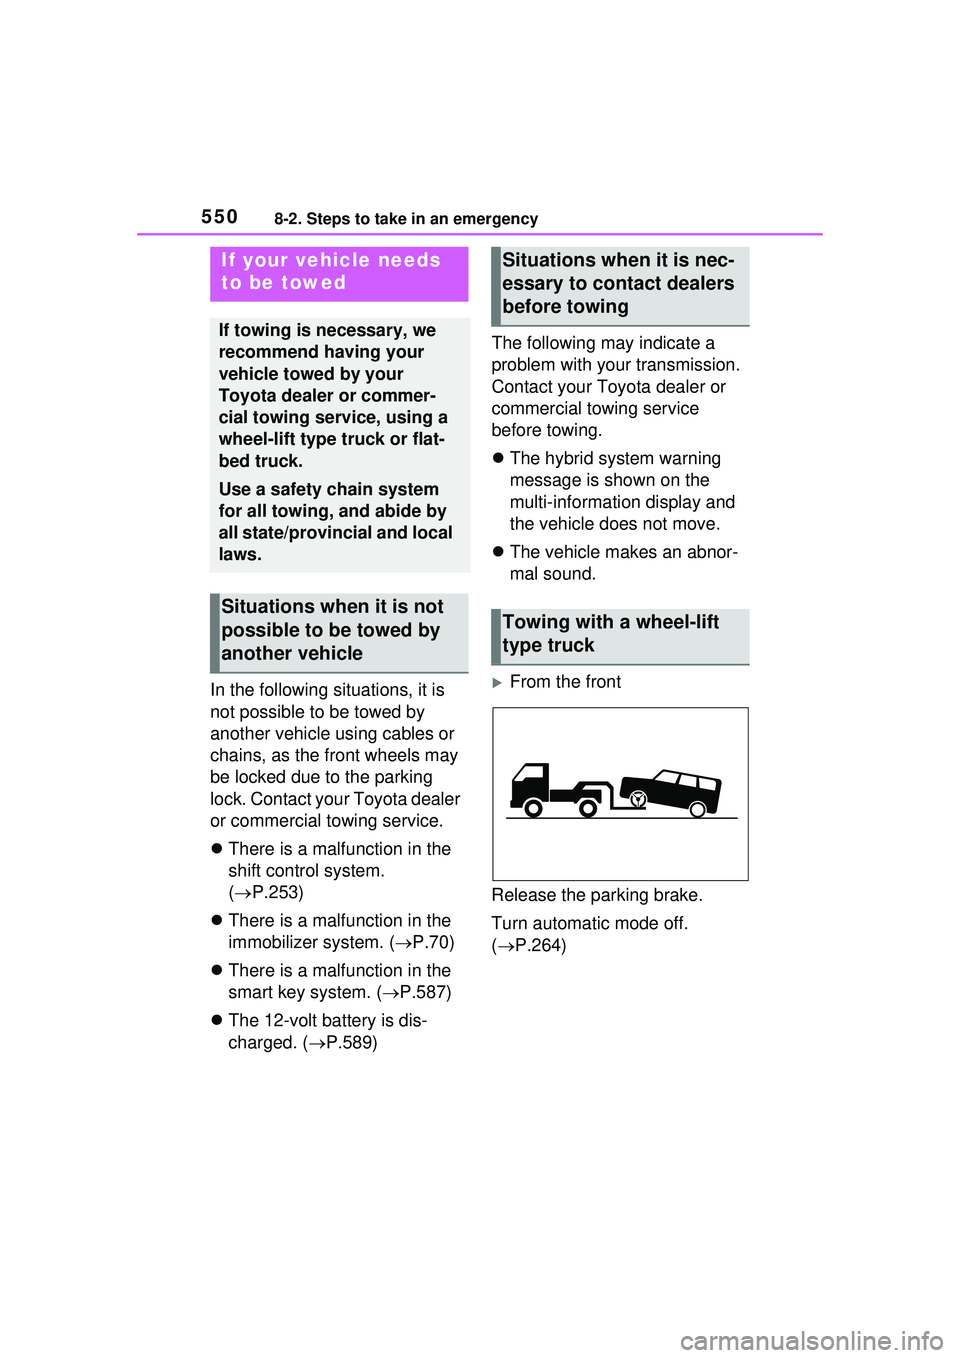 TOYOTA PRIUS PRIME 2023  Owners Manual 5508-2. Steps to take in an emergency
8-2.Steps to take in an emergency
In the following situations, it is 
not possible to be towed by 
another vehicle using cables or 
chains, as the front wheels ma